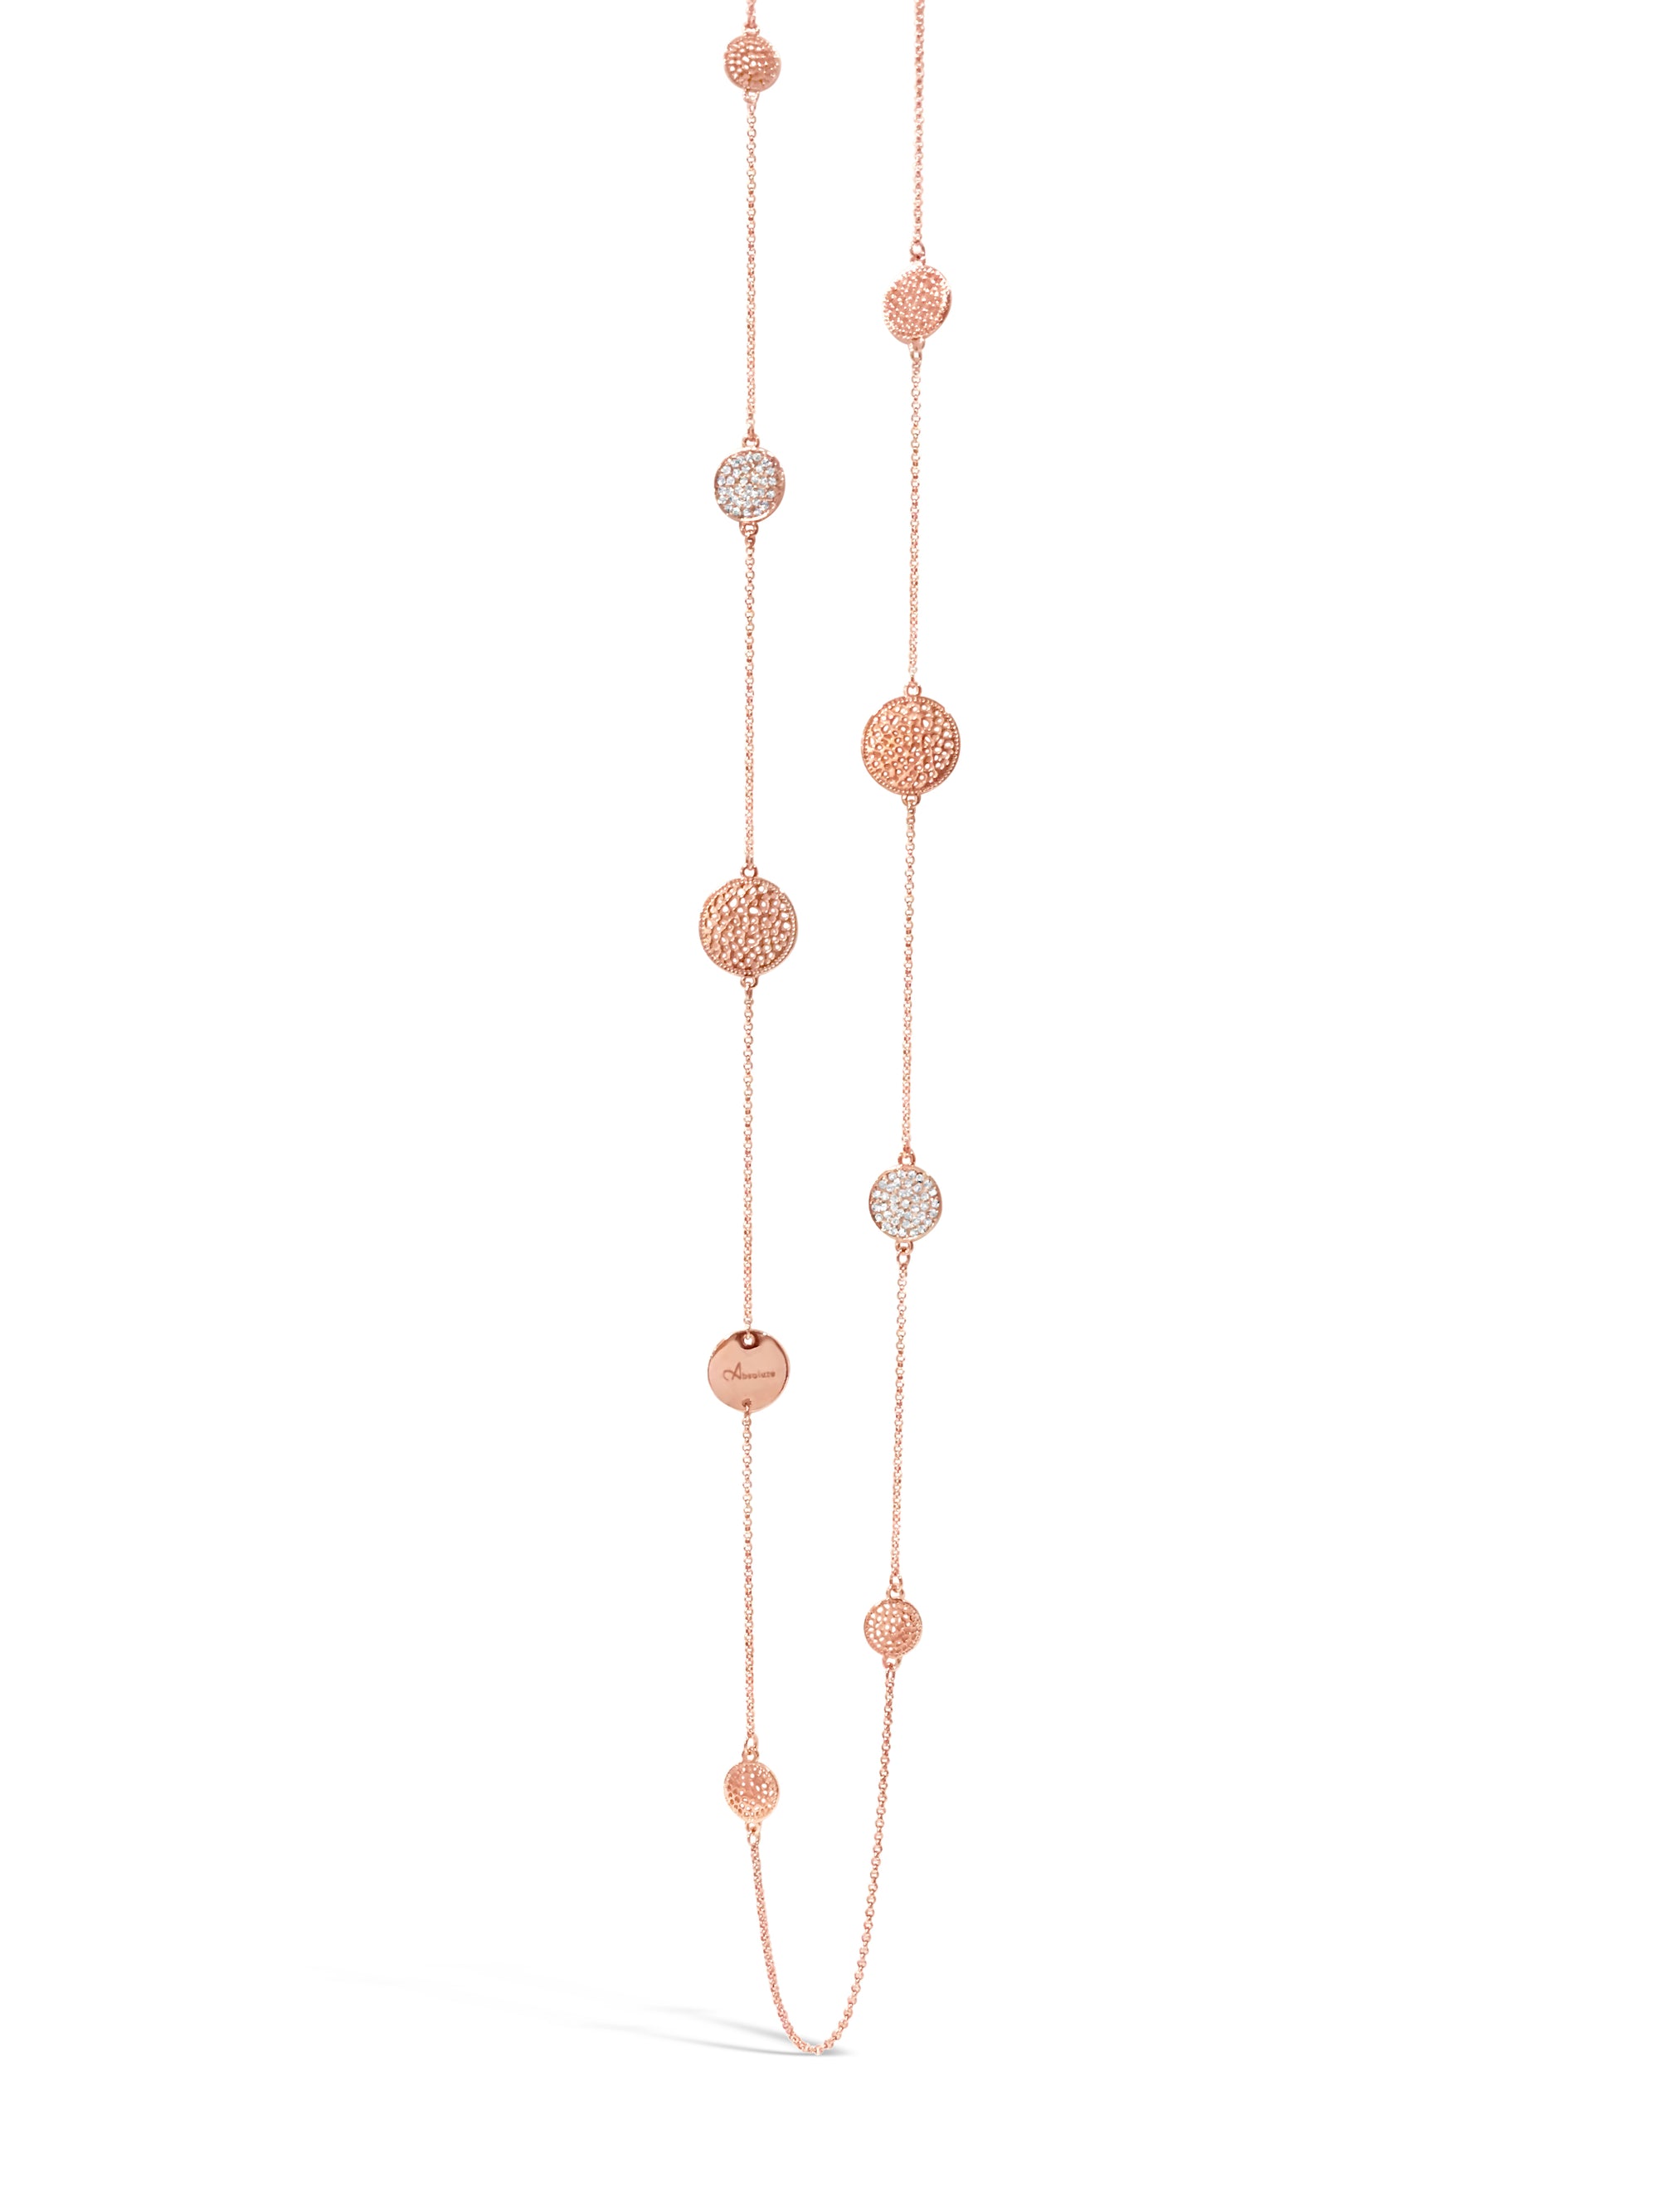 Absolute Jewellery Rose Gold Necklace 42"